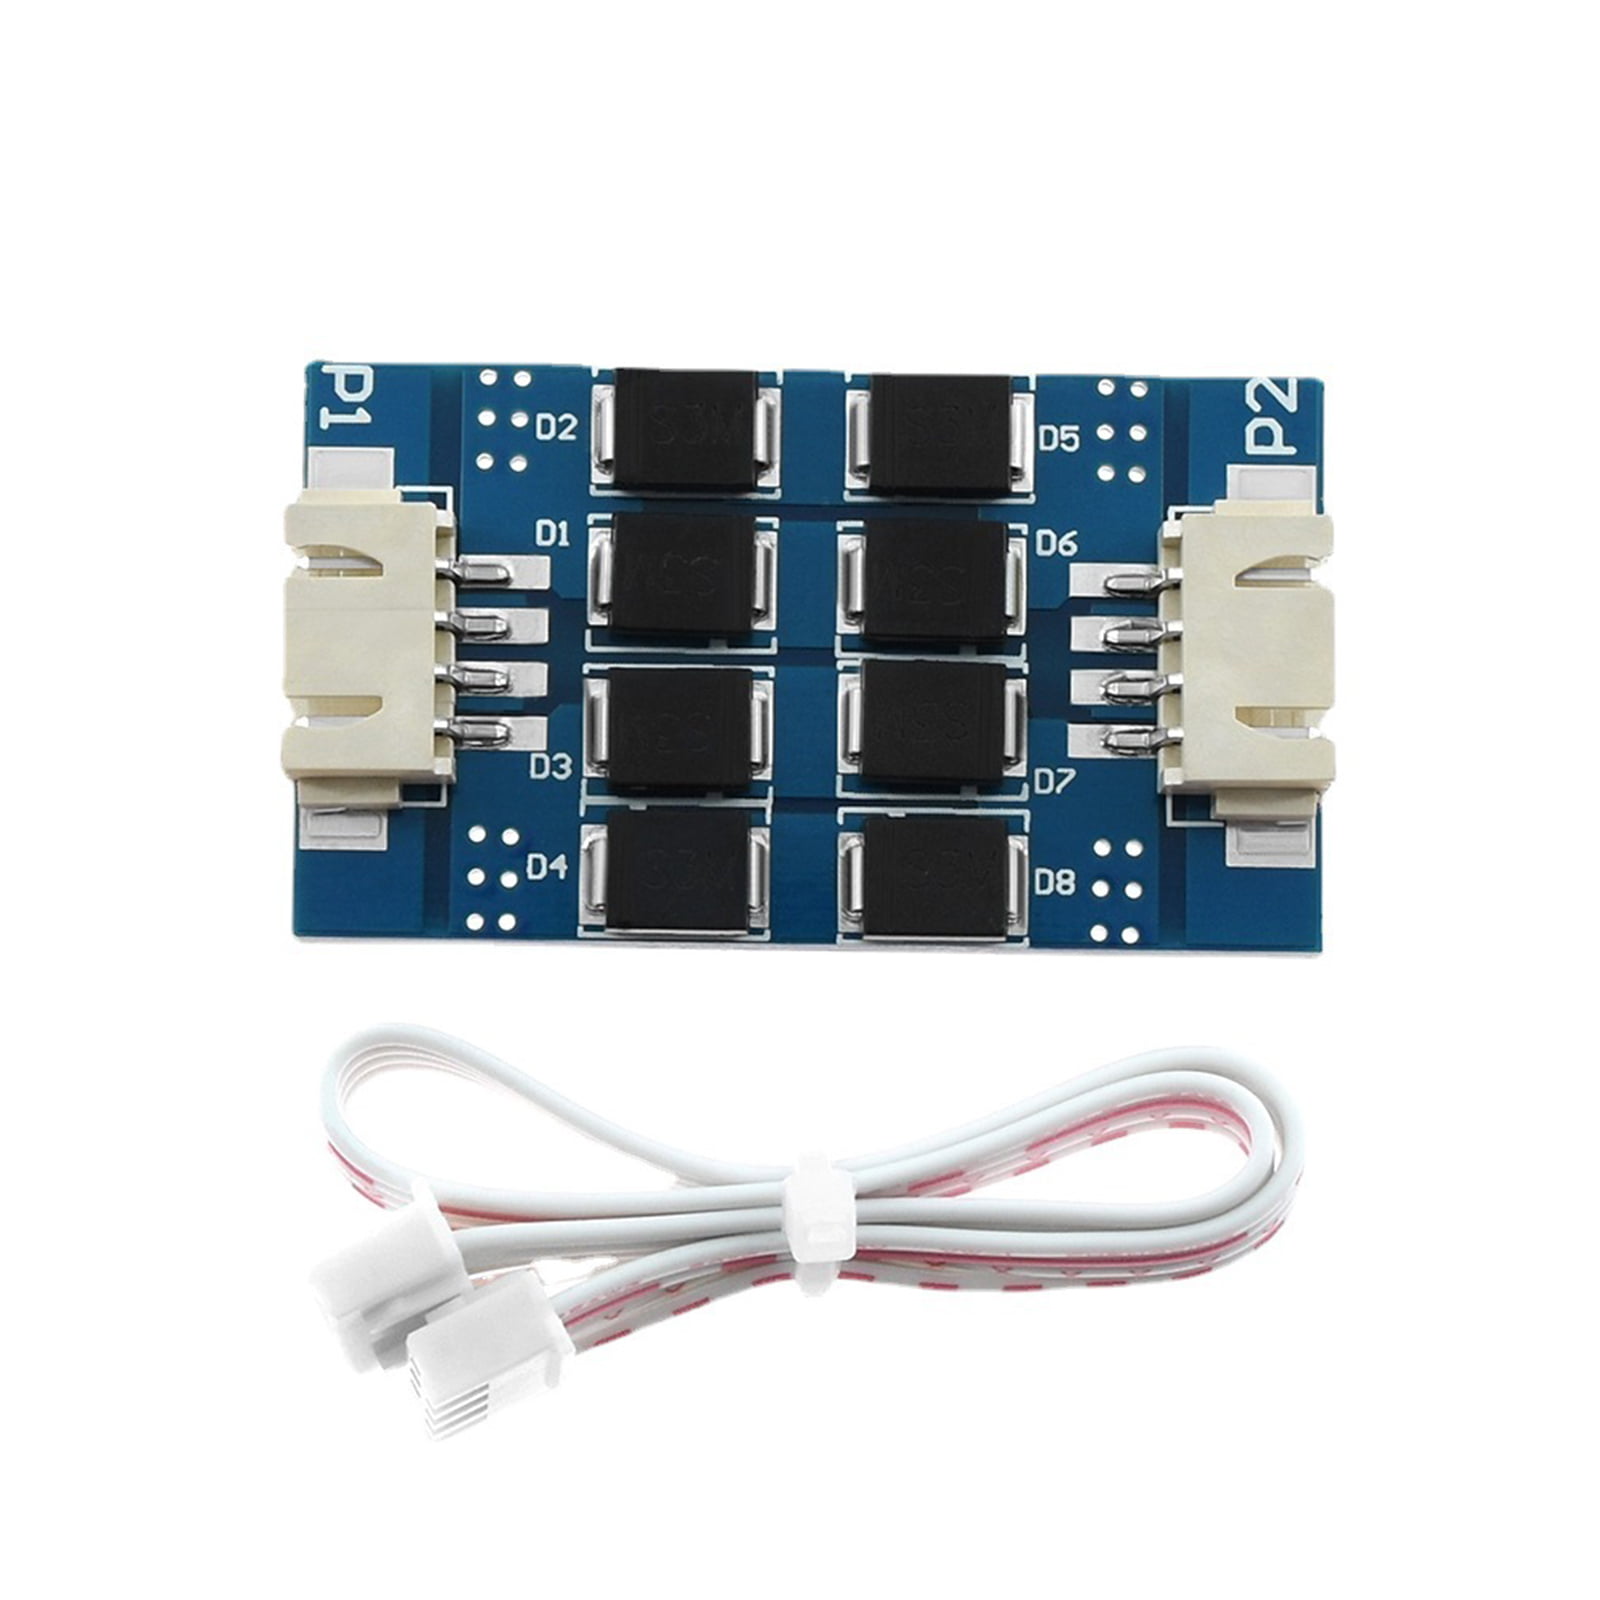 TL-Smoother Kit Addon Module for Pattern Elimination Motor Filter Clipping Filter 3D Printer Motor Drivers Controller 3 